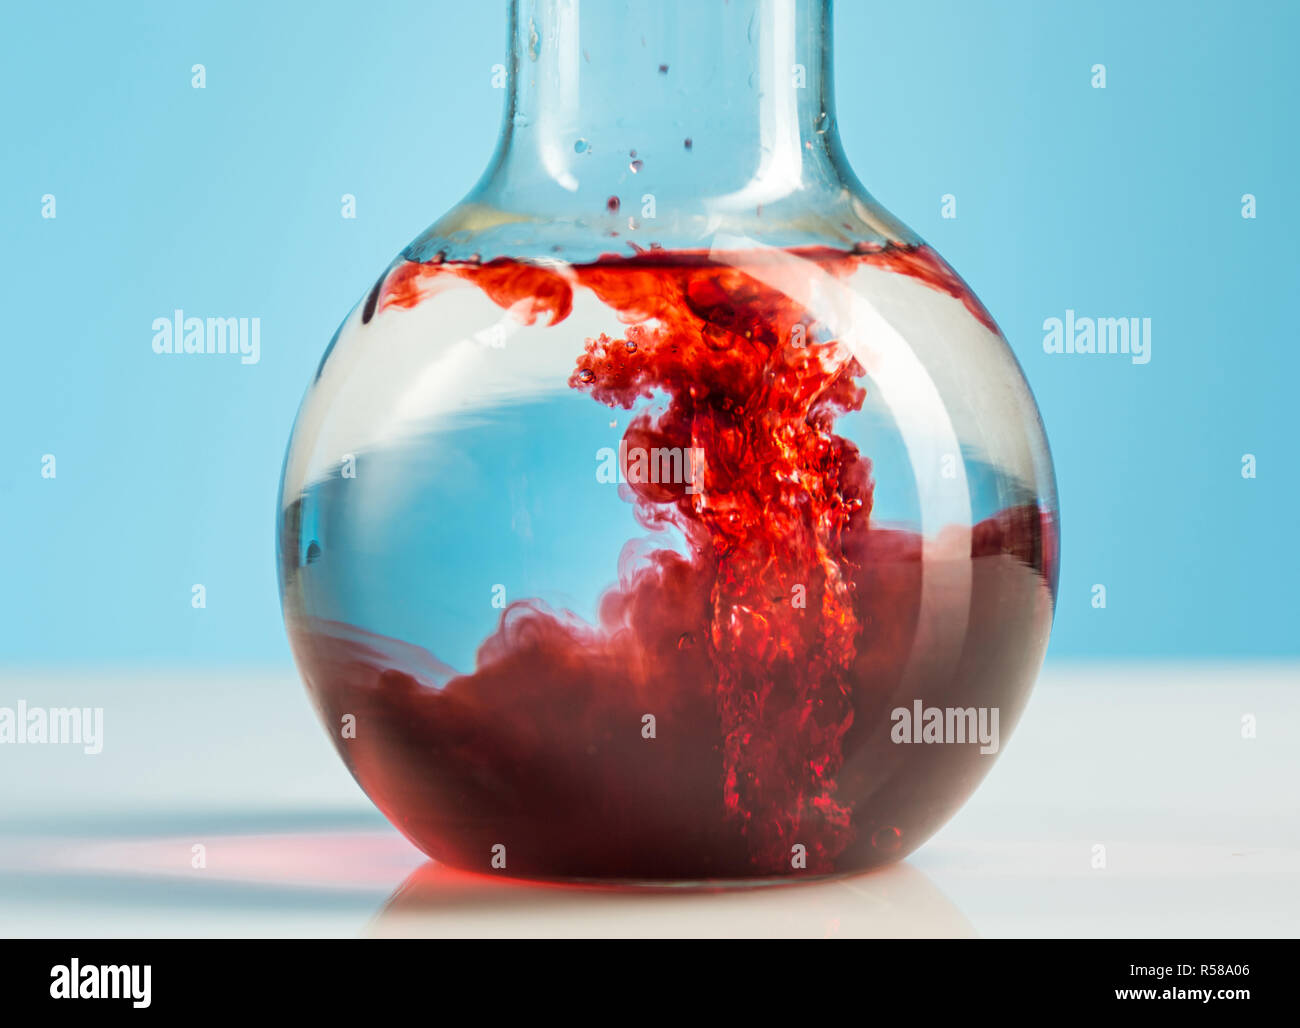 The laboratory glassware and red liquid inside on white Stock Photo